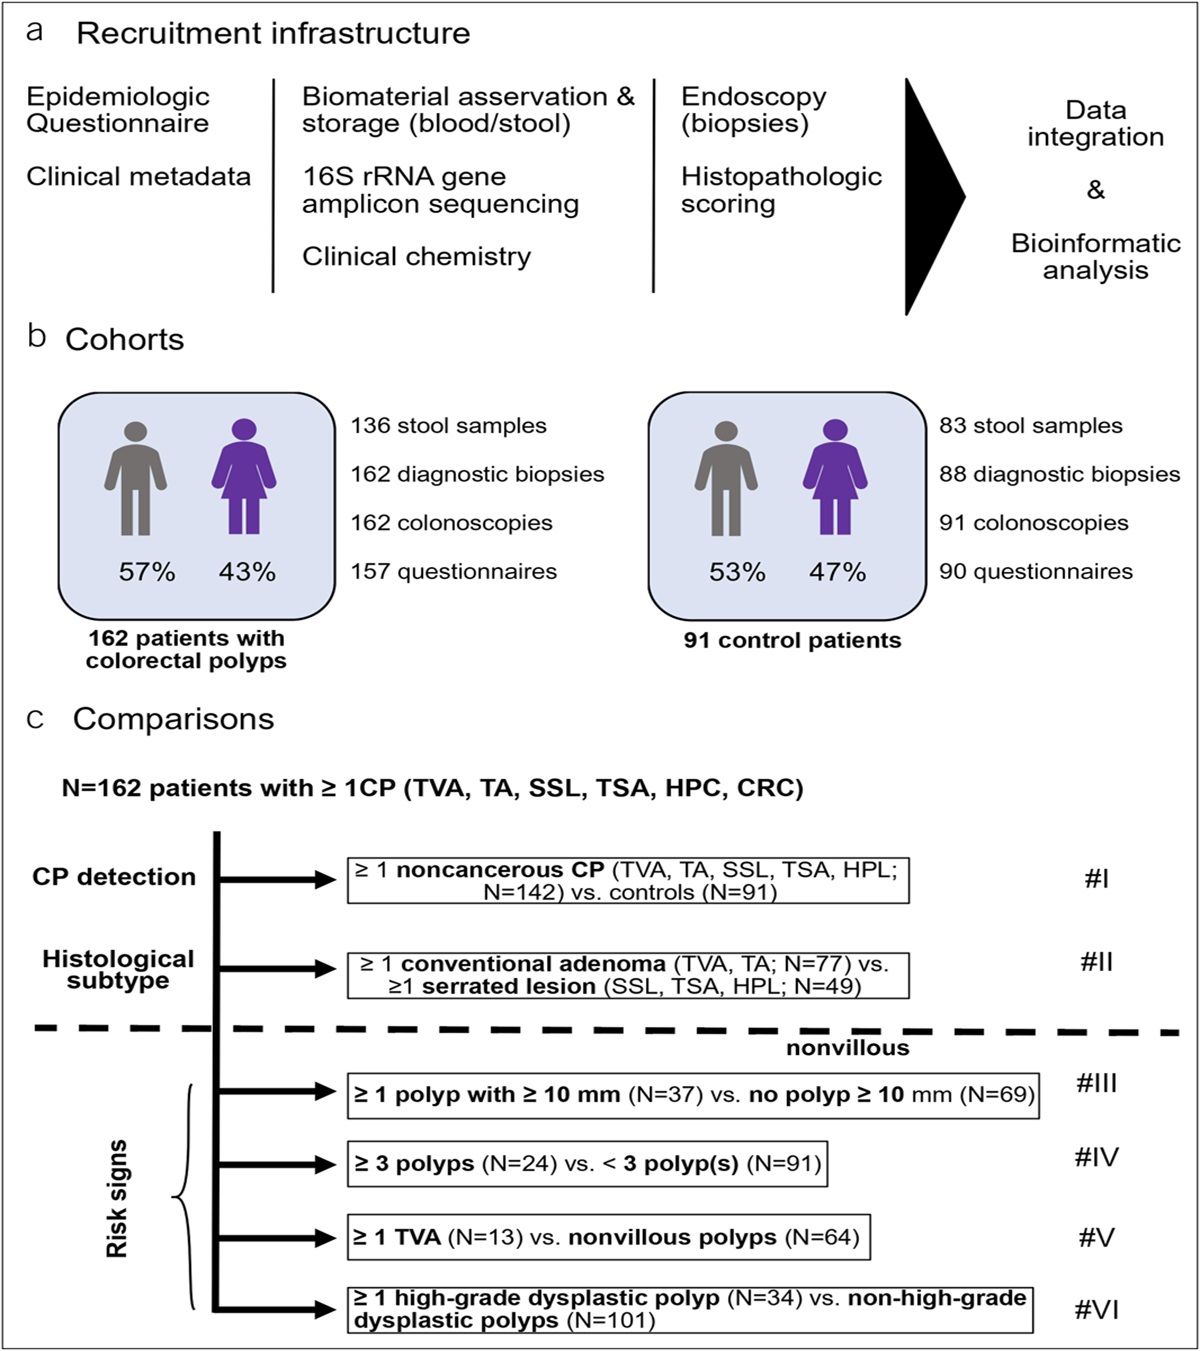 Systematic Evaluation of Clinical, Nutritional, and Fecal Microbial Factors for Their Association With Colorectal Polyps